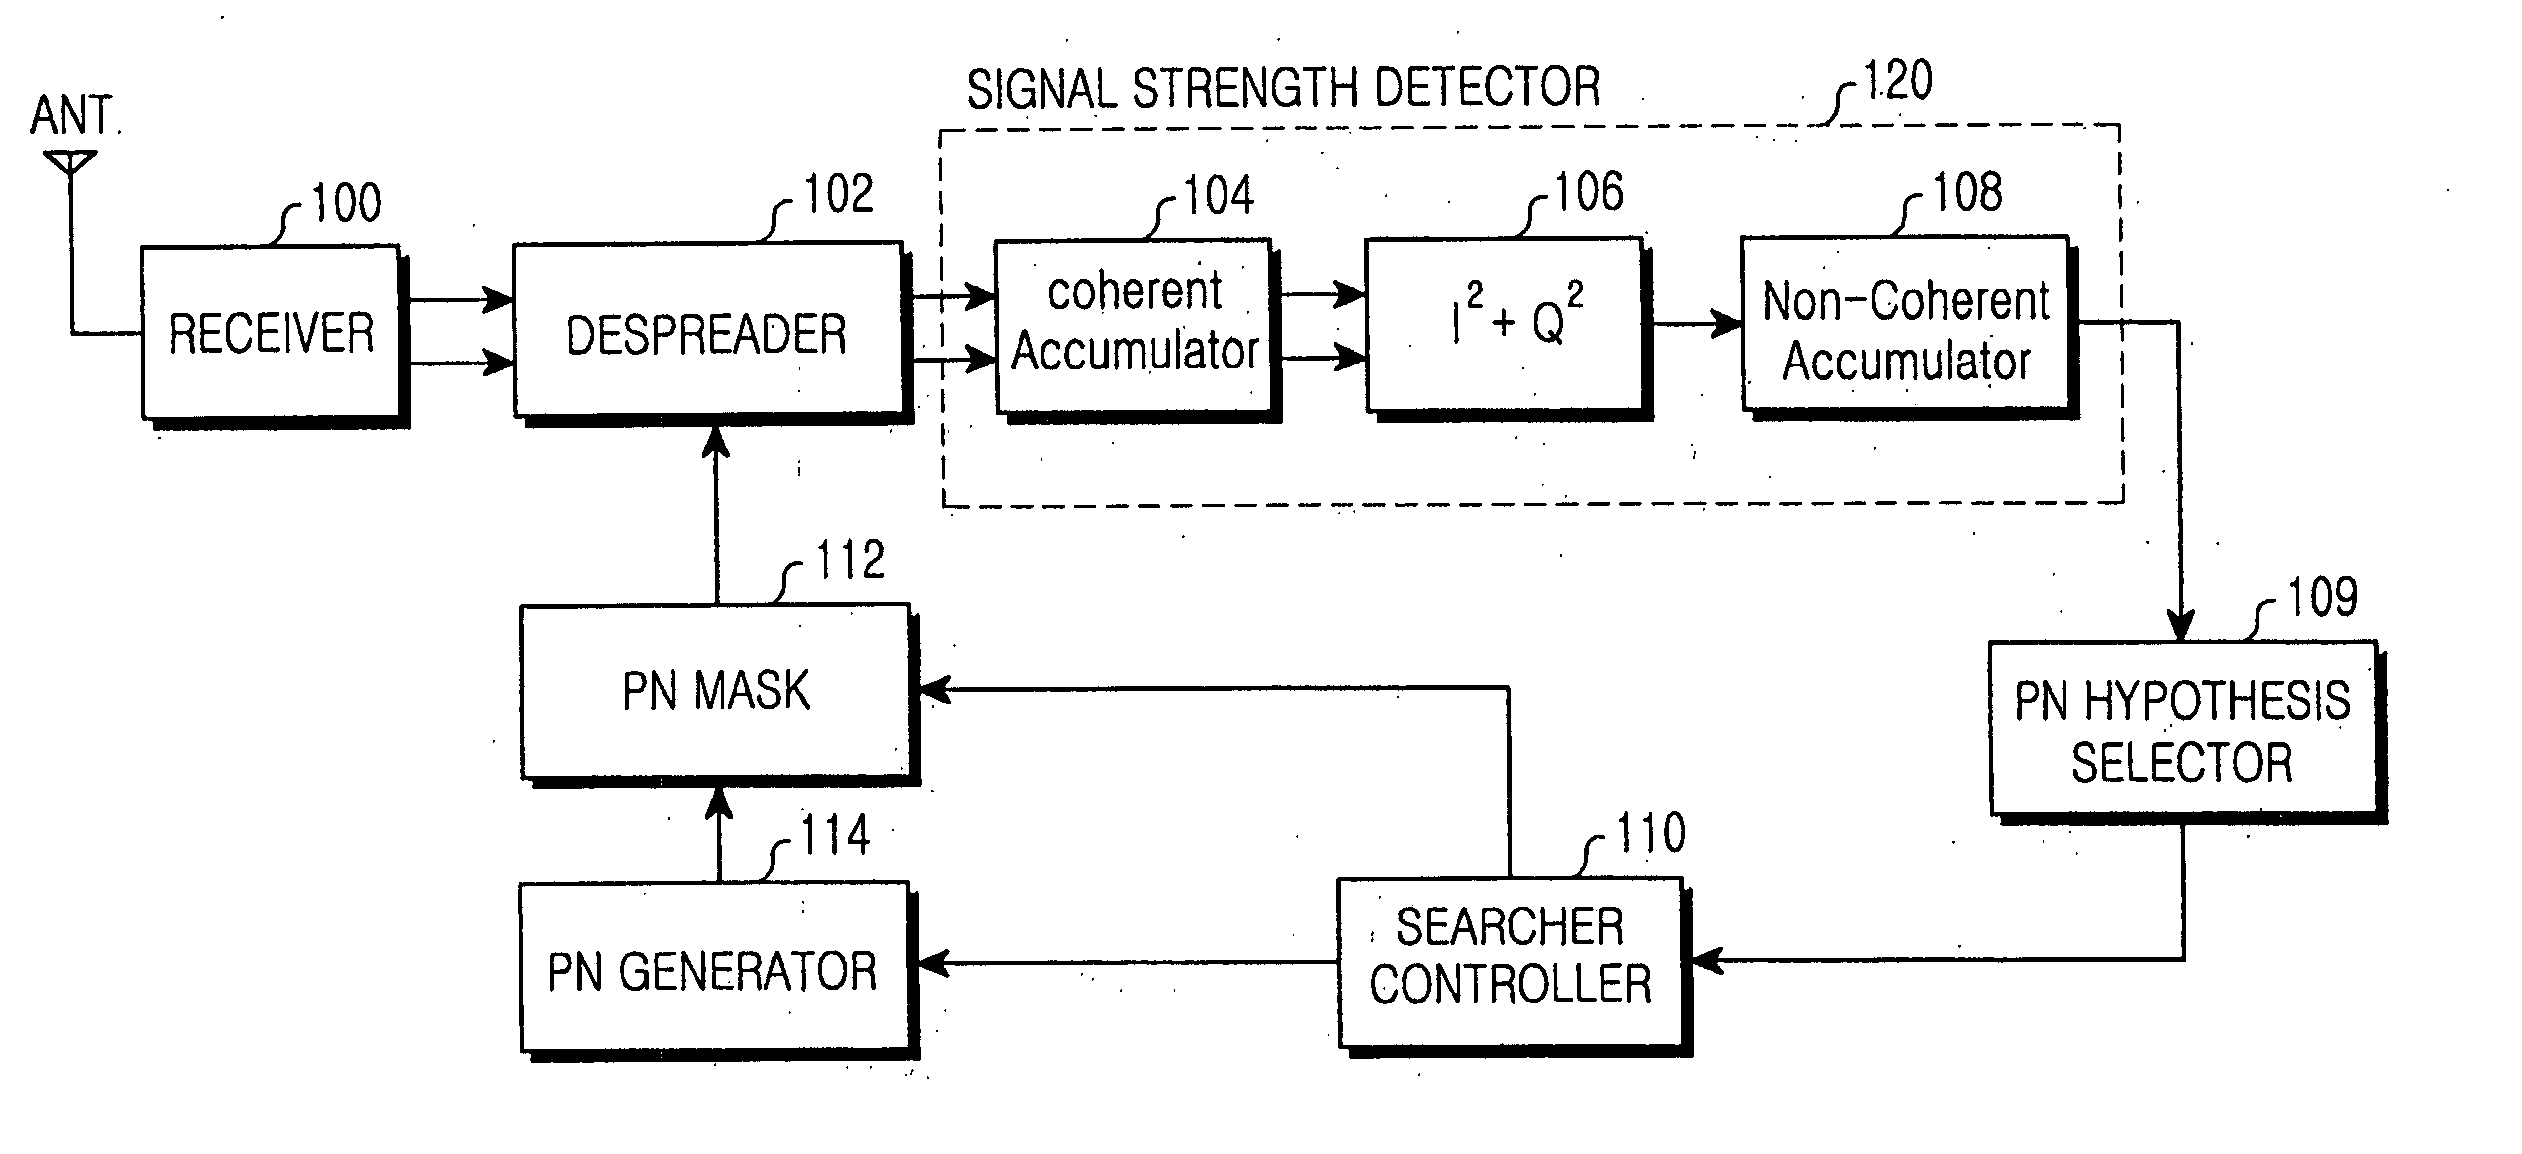 Apparatus and method for acquiring pilot synchronization in a code division multiple access system